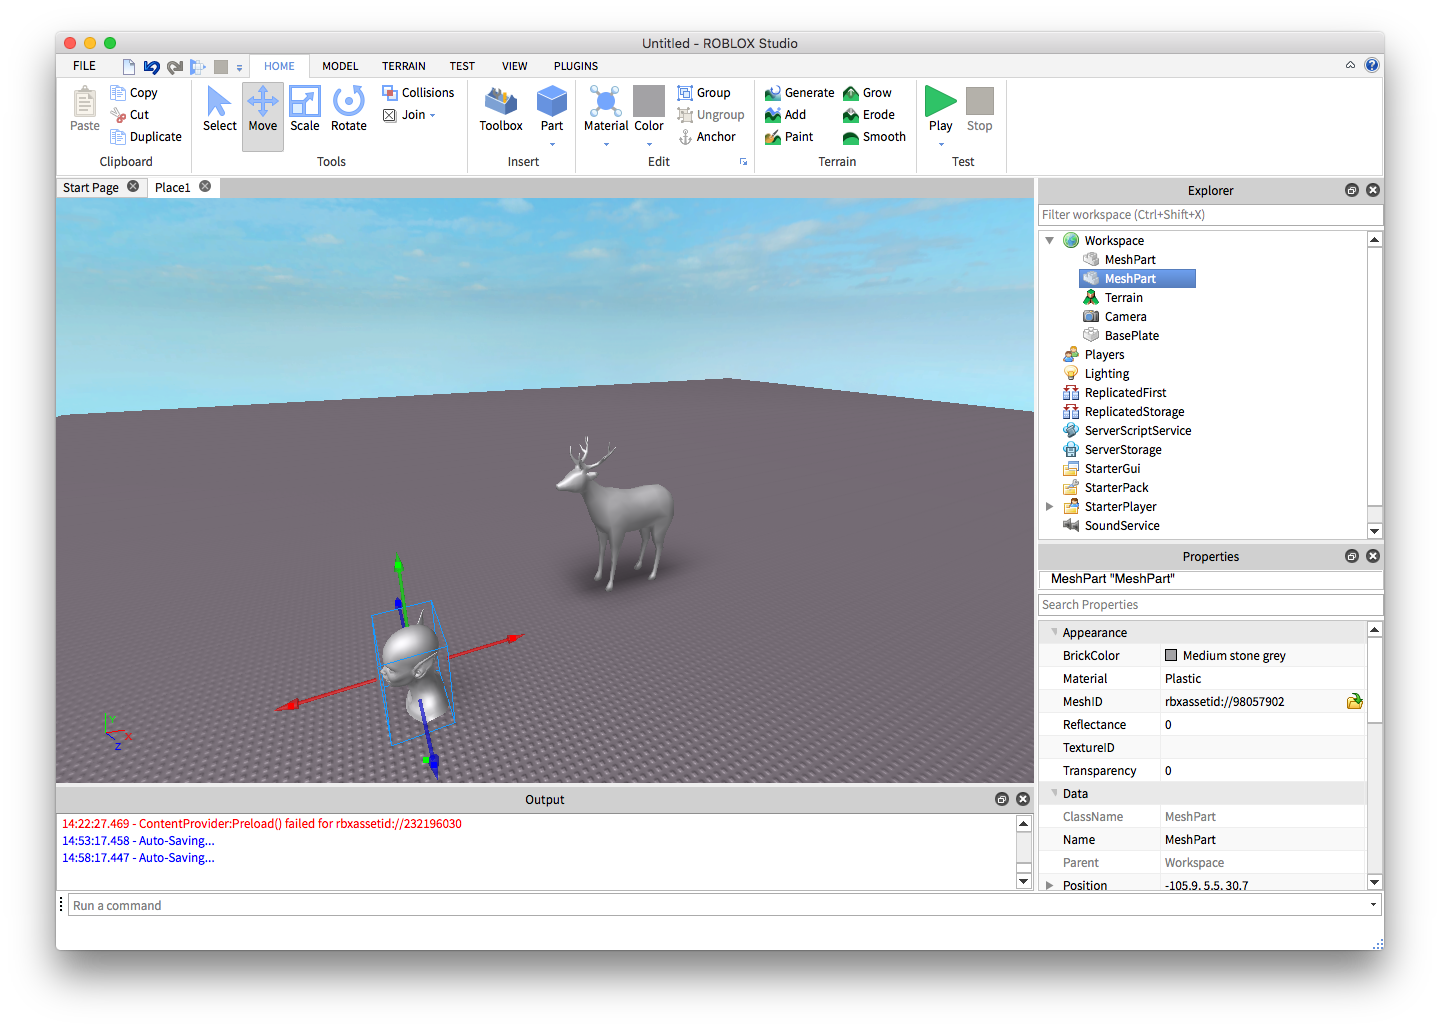 How To Make Morphs In Roblox Studio